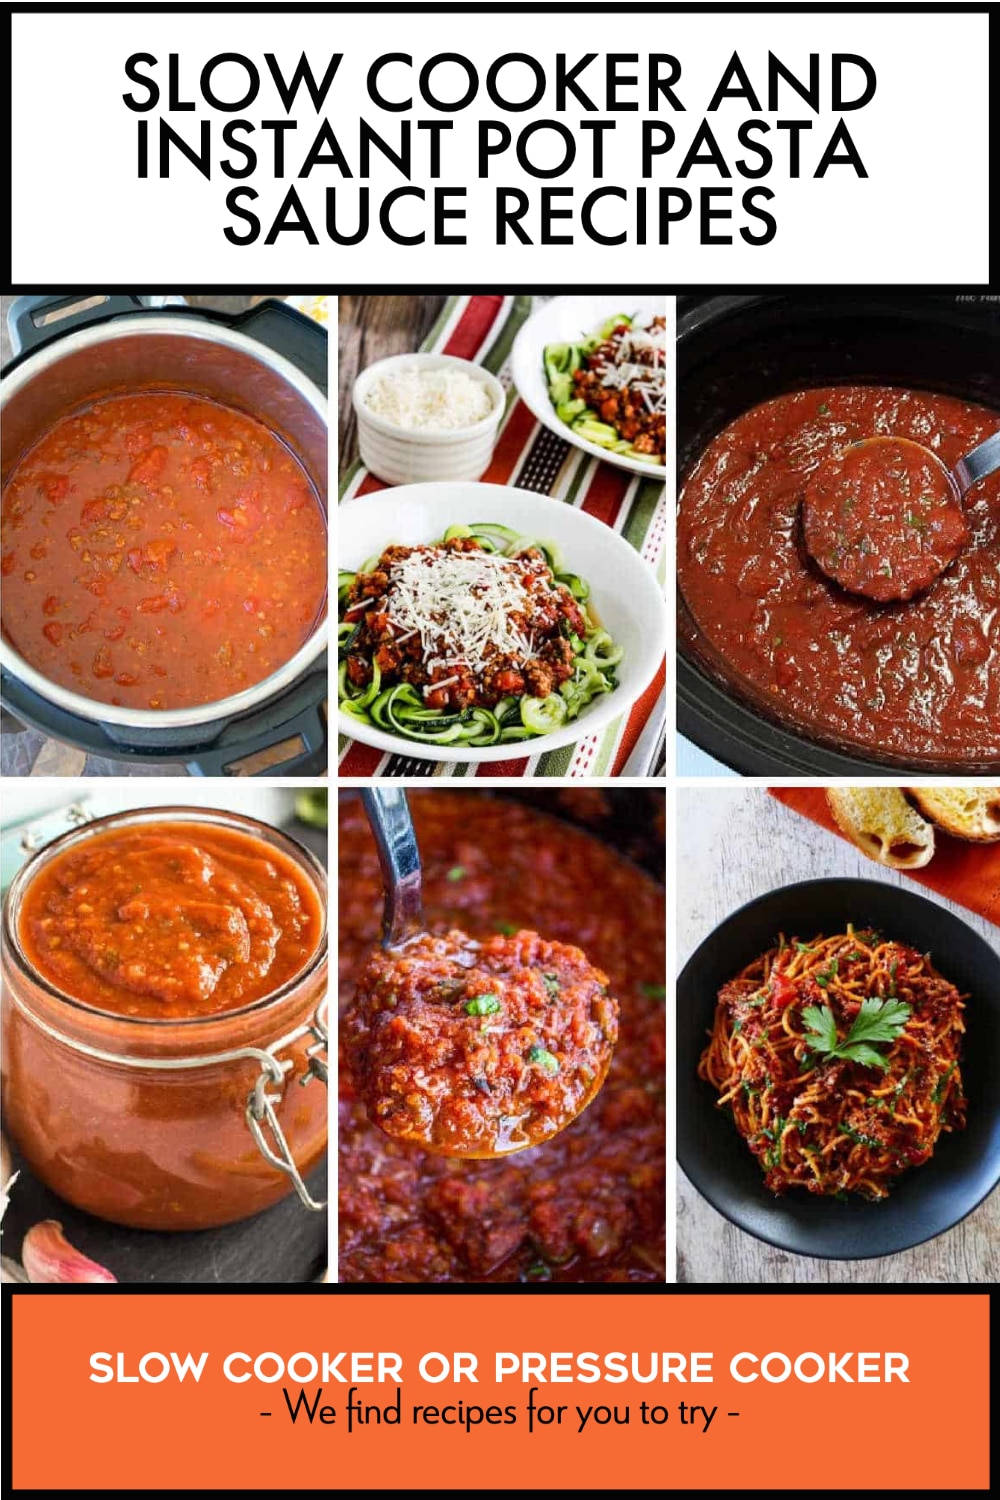 Pinterest image of Slow Cooker and Instant Pot Pasta Sauce Recipes